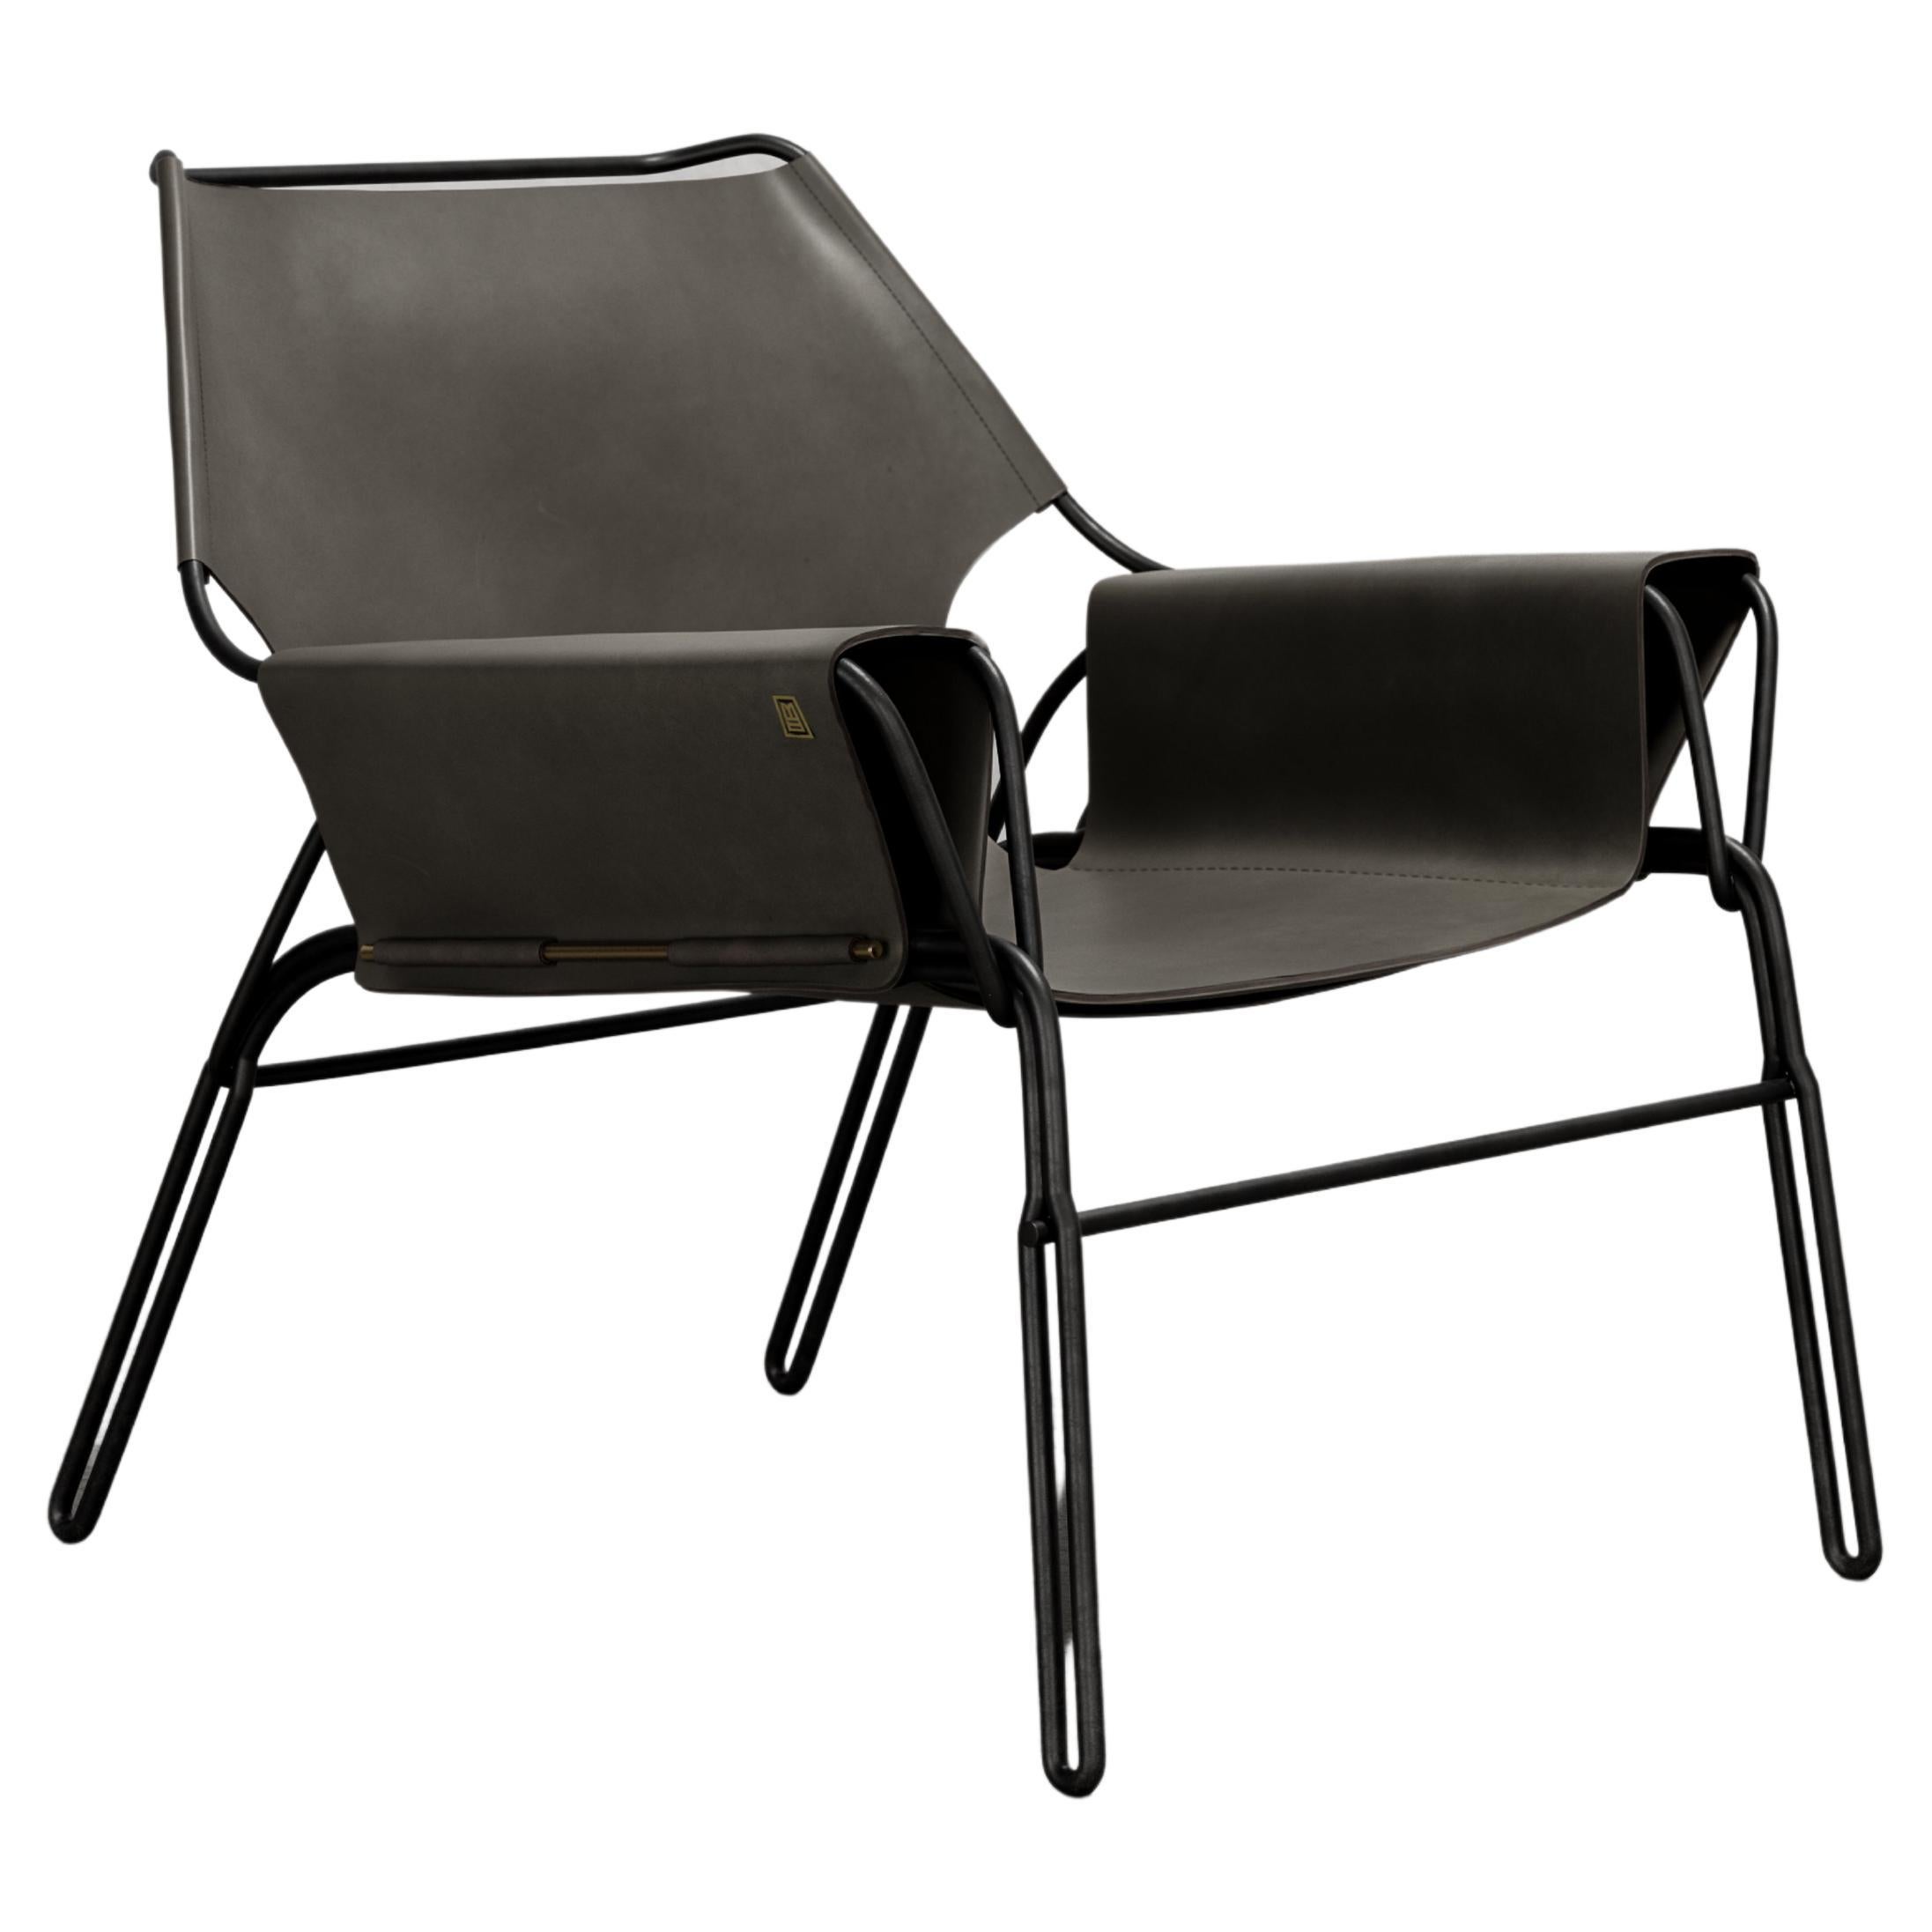 PERFIDIA_02 Olivo Thick Leather Sling Lounge Chair in Black Steel by ANDEAN